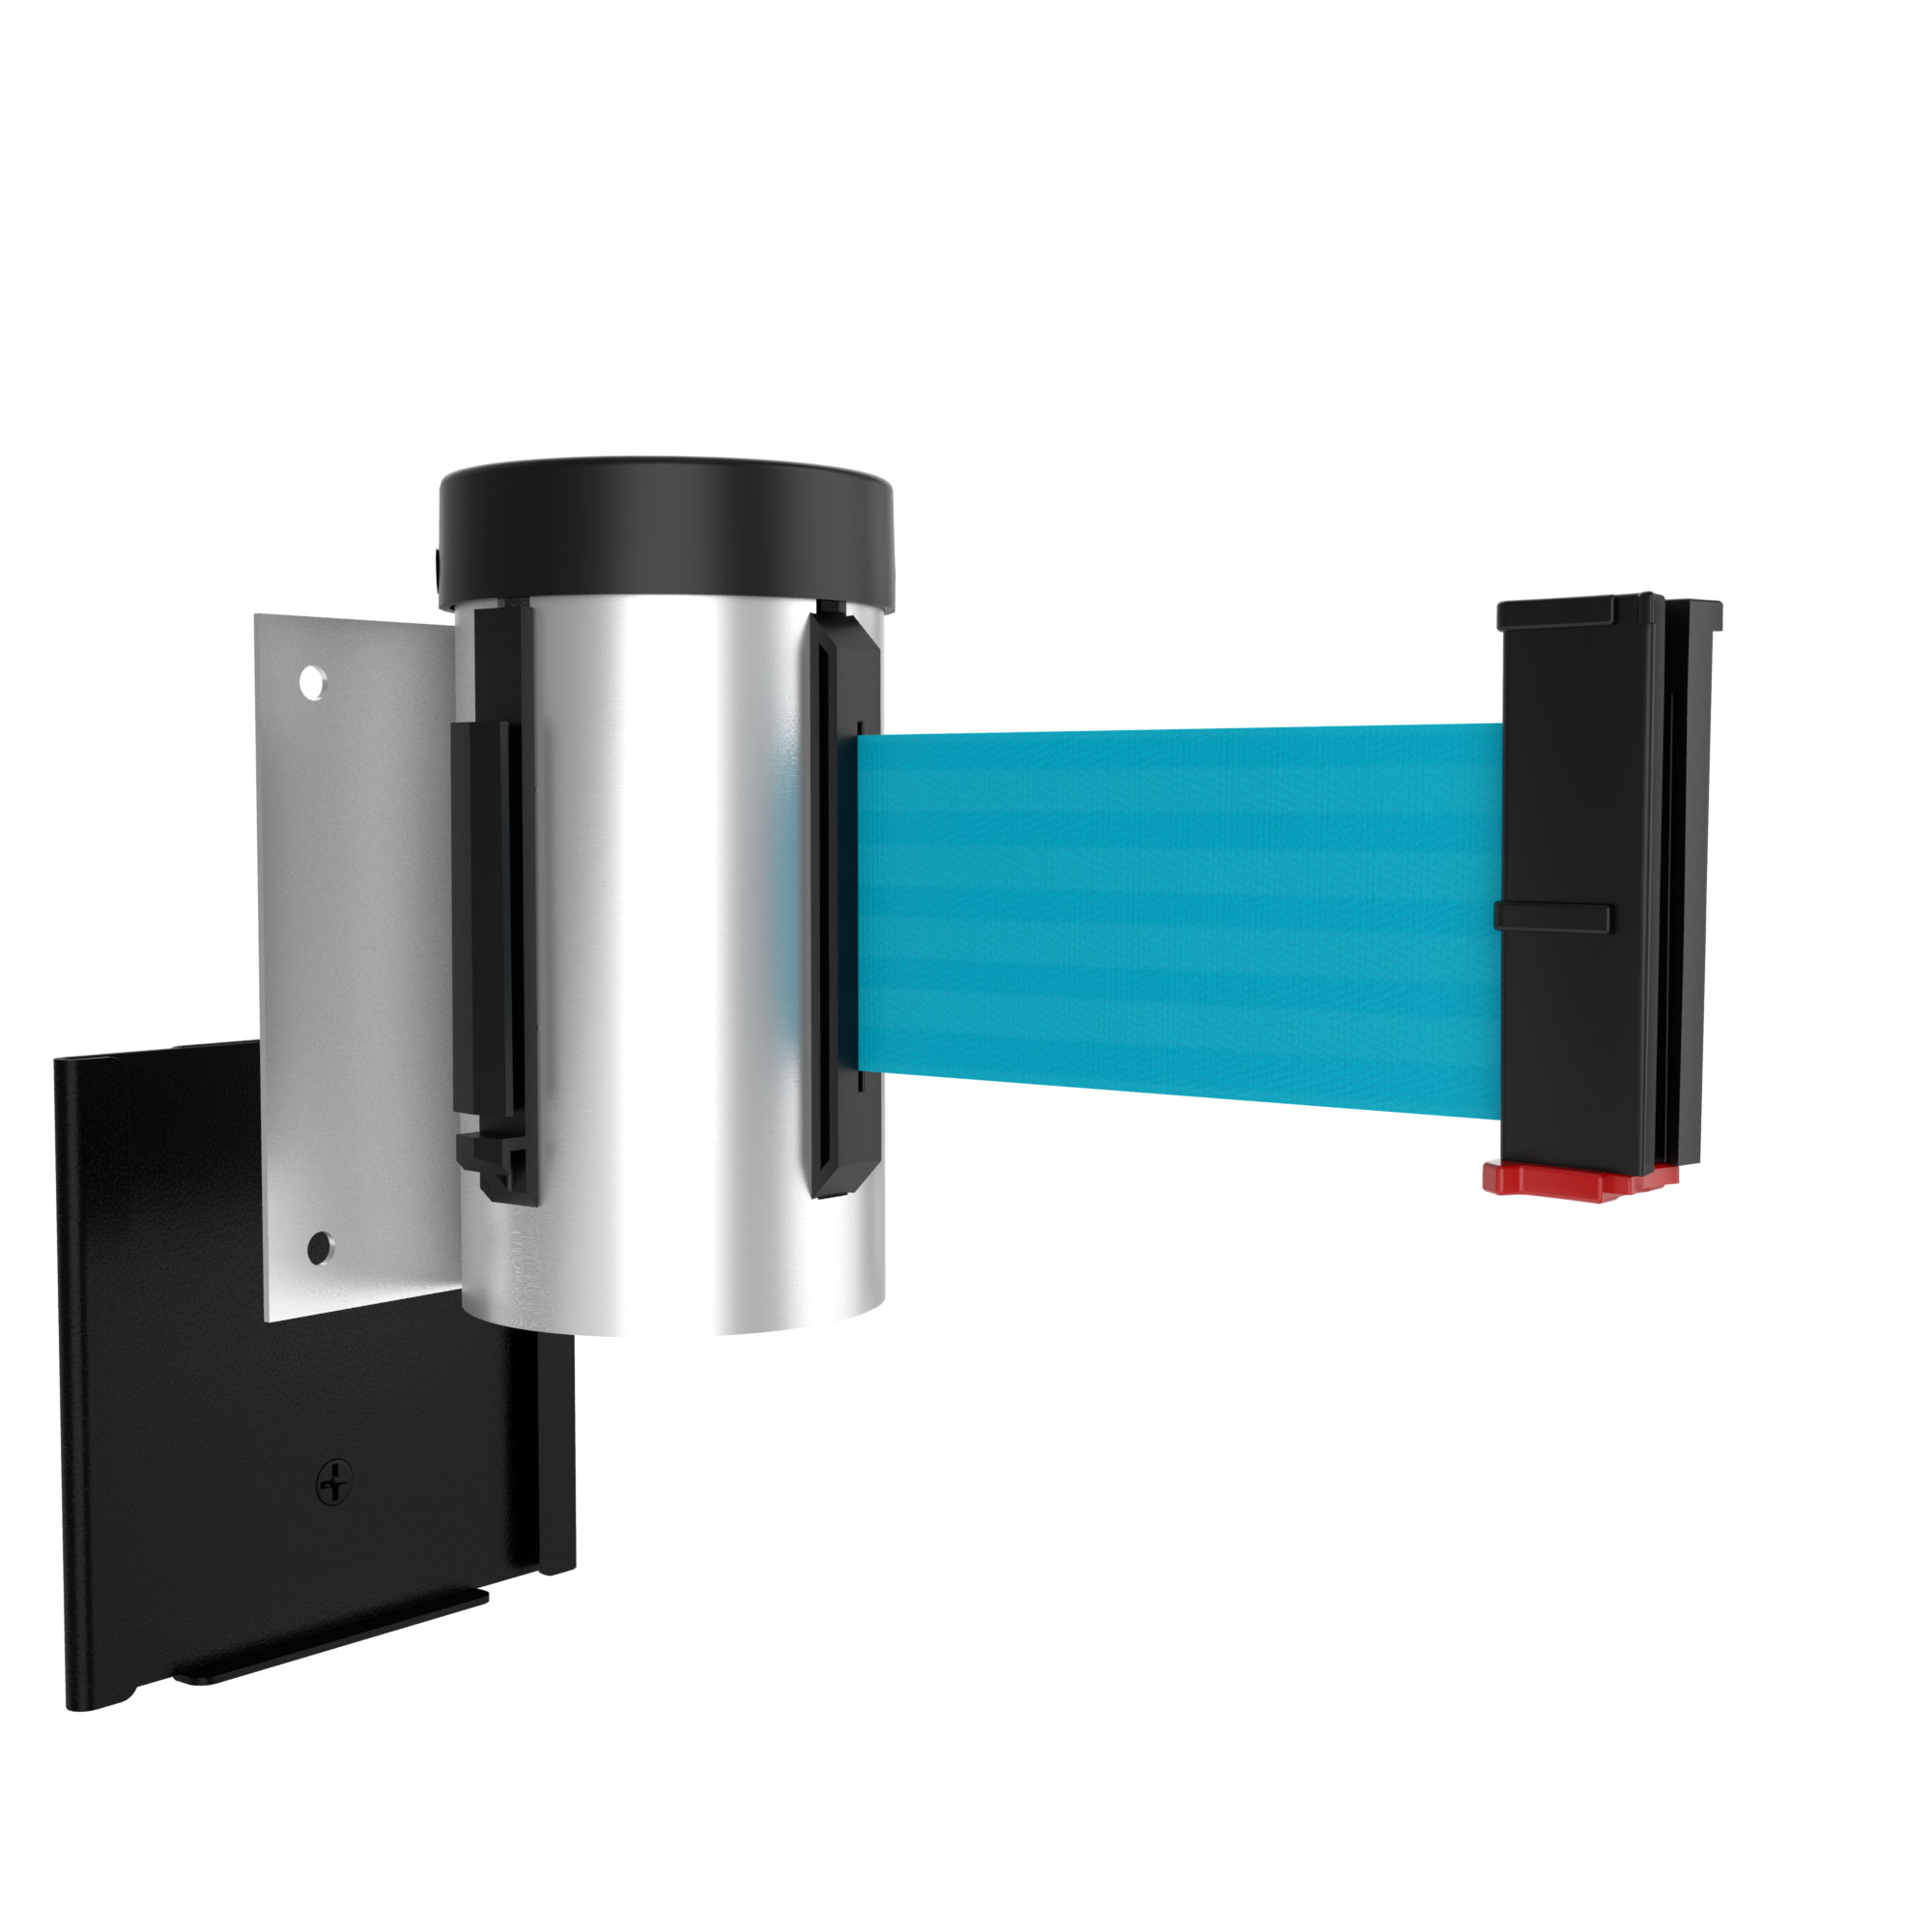 Wall Mounted Retractable Barriers | Caution/Danger Tape Barriers